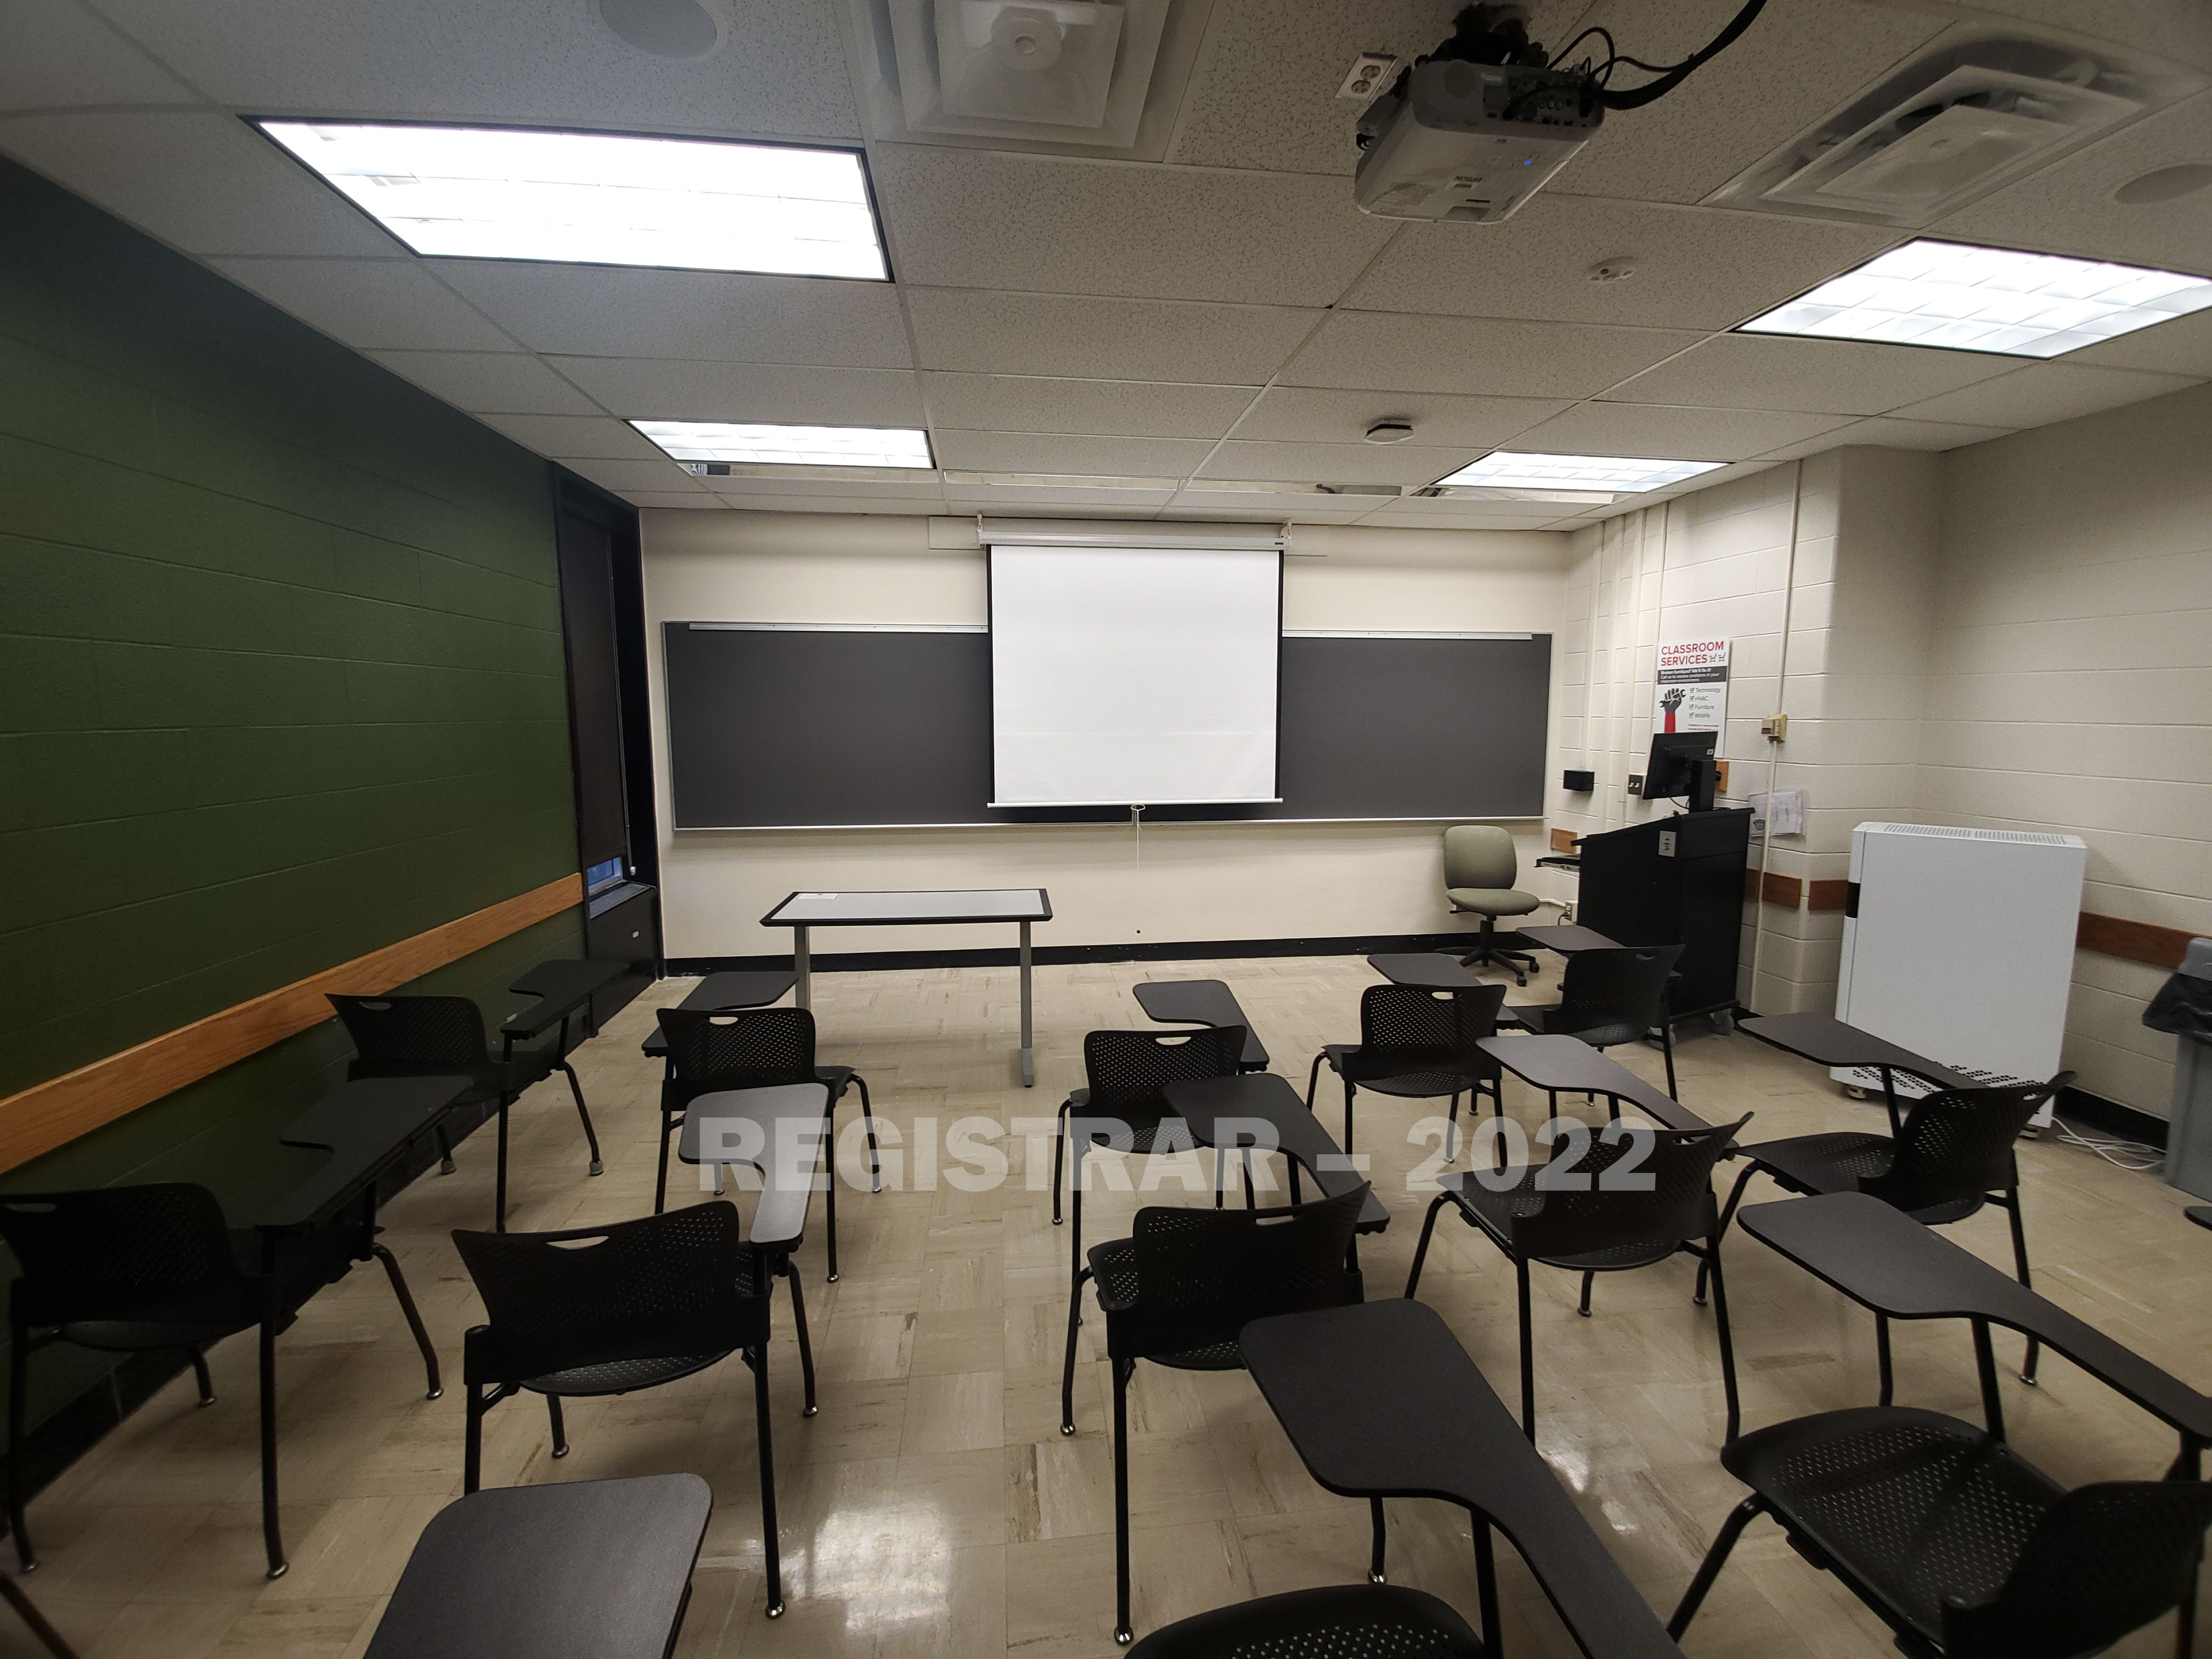 Baker Systems Engineering room 272 ultra wide angle view from the back of the room with projector screen down